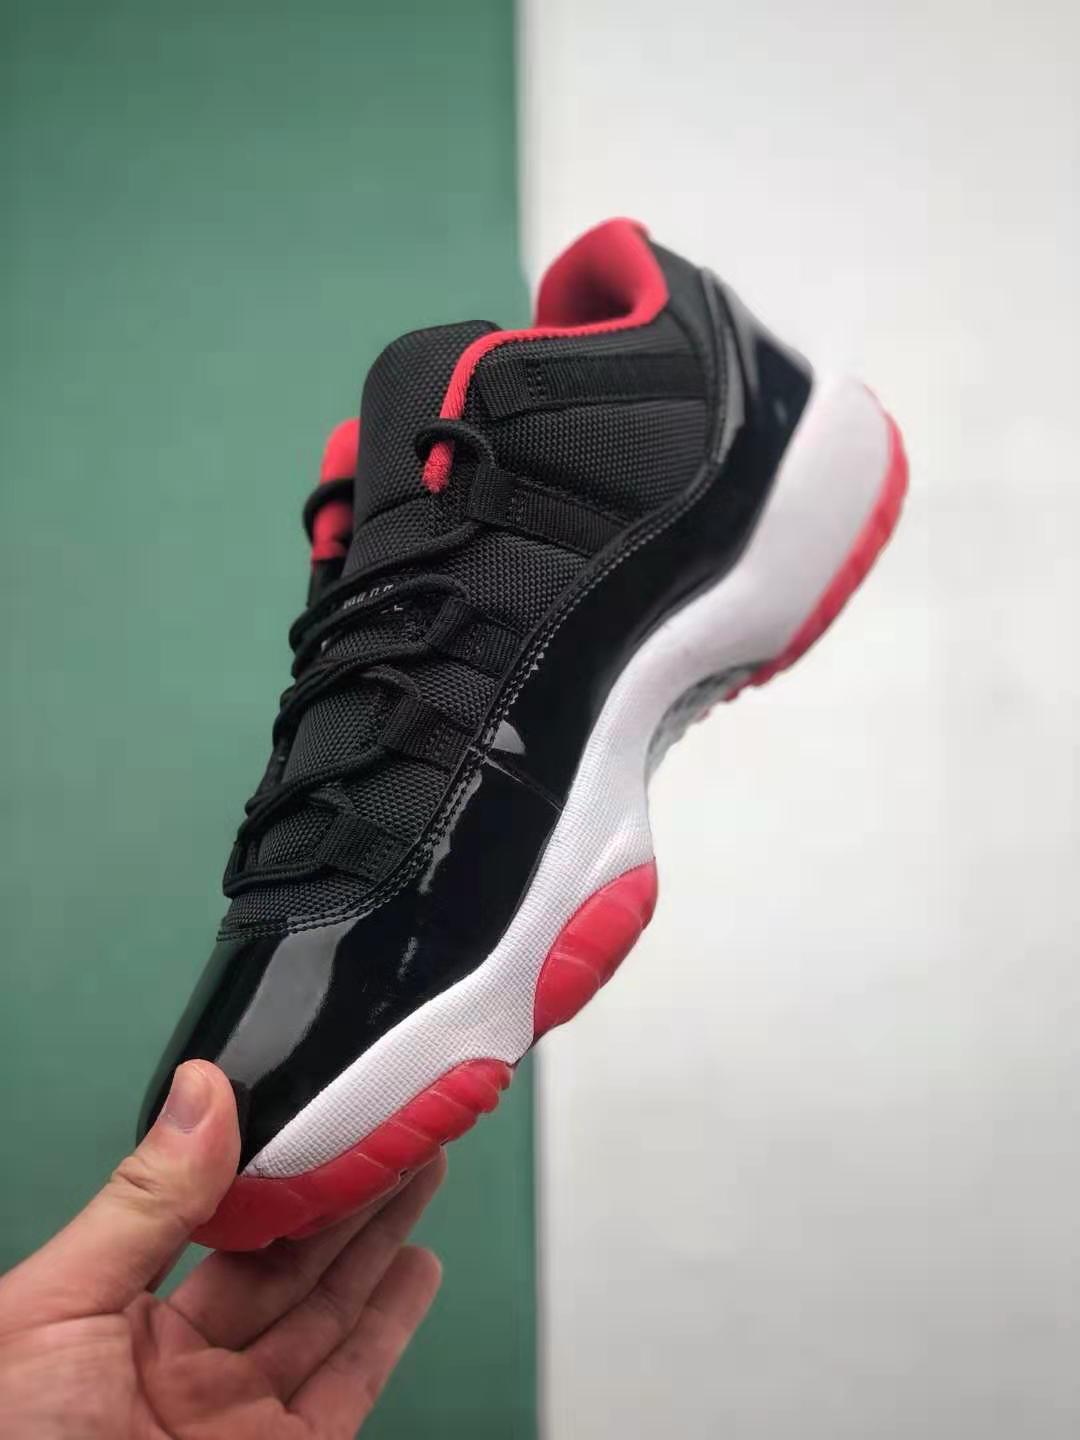 Air Jordan 11 Retro Low - Bred 528895-012: Iconic Style & Classic Design | Free Shipping